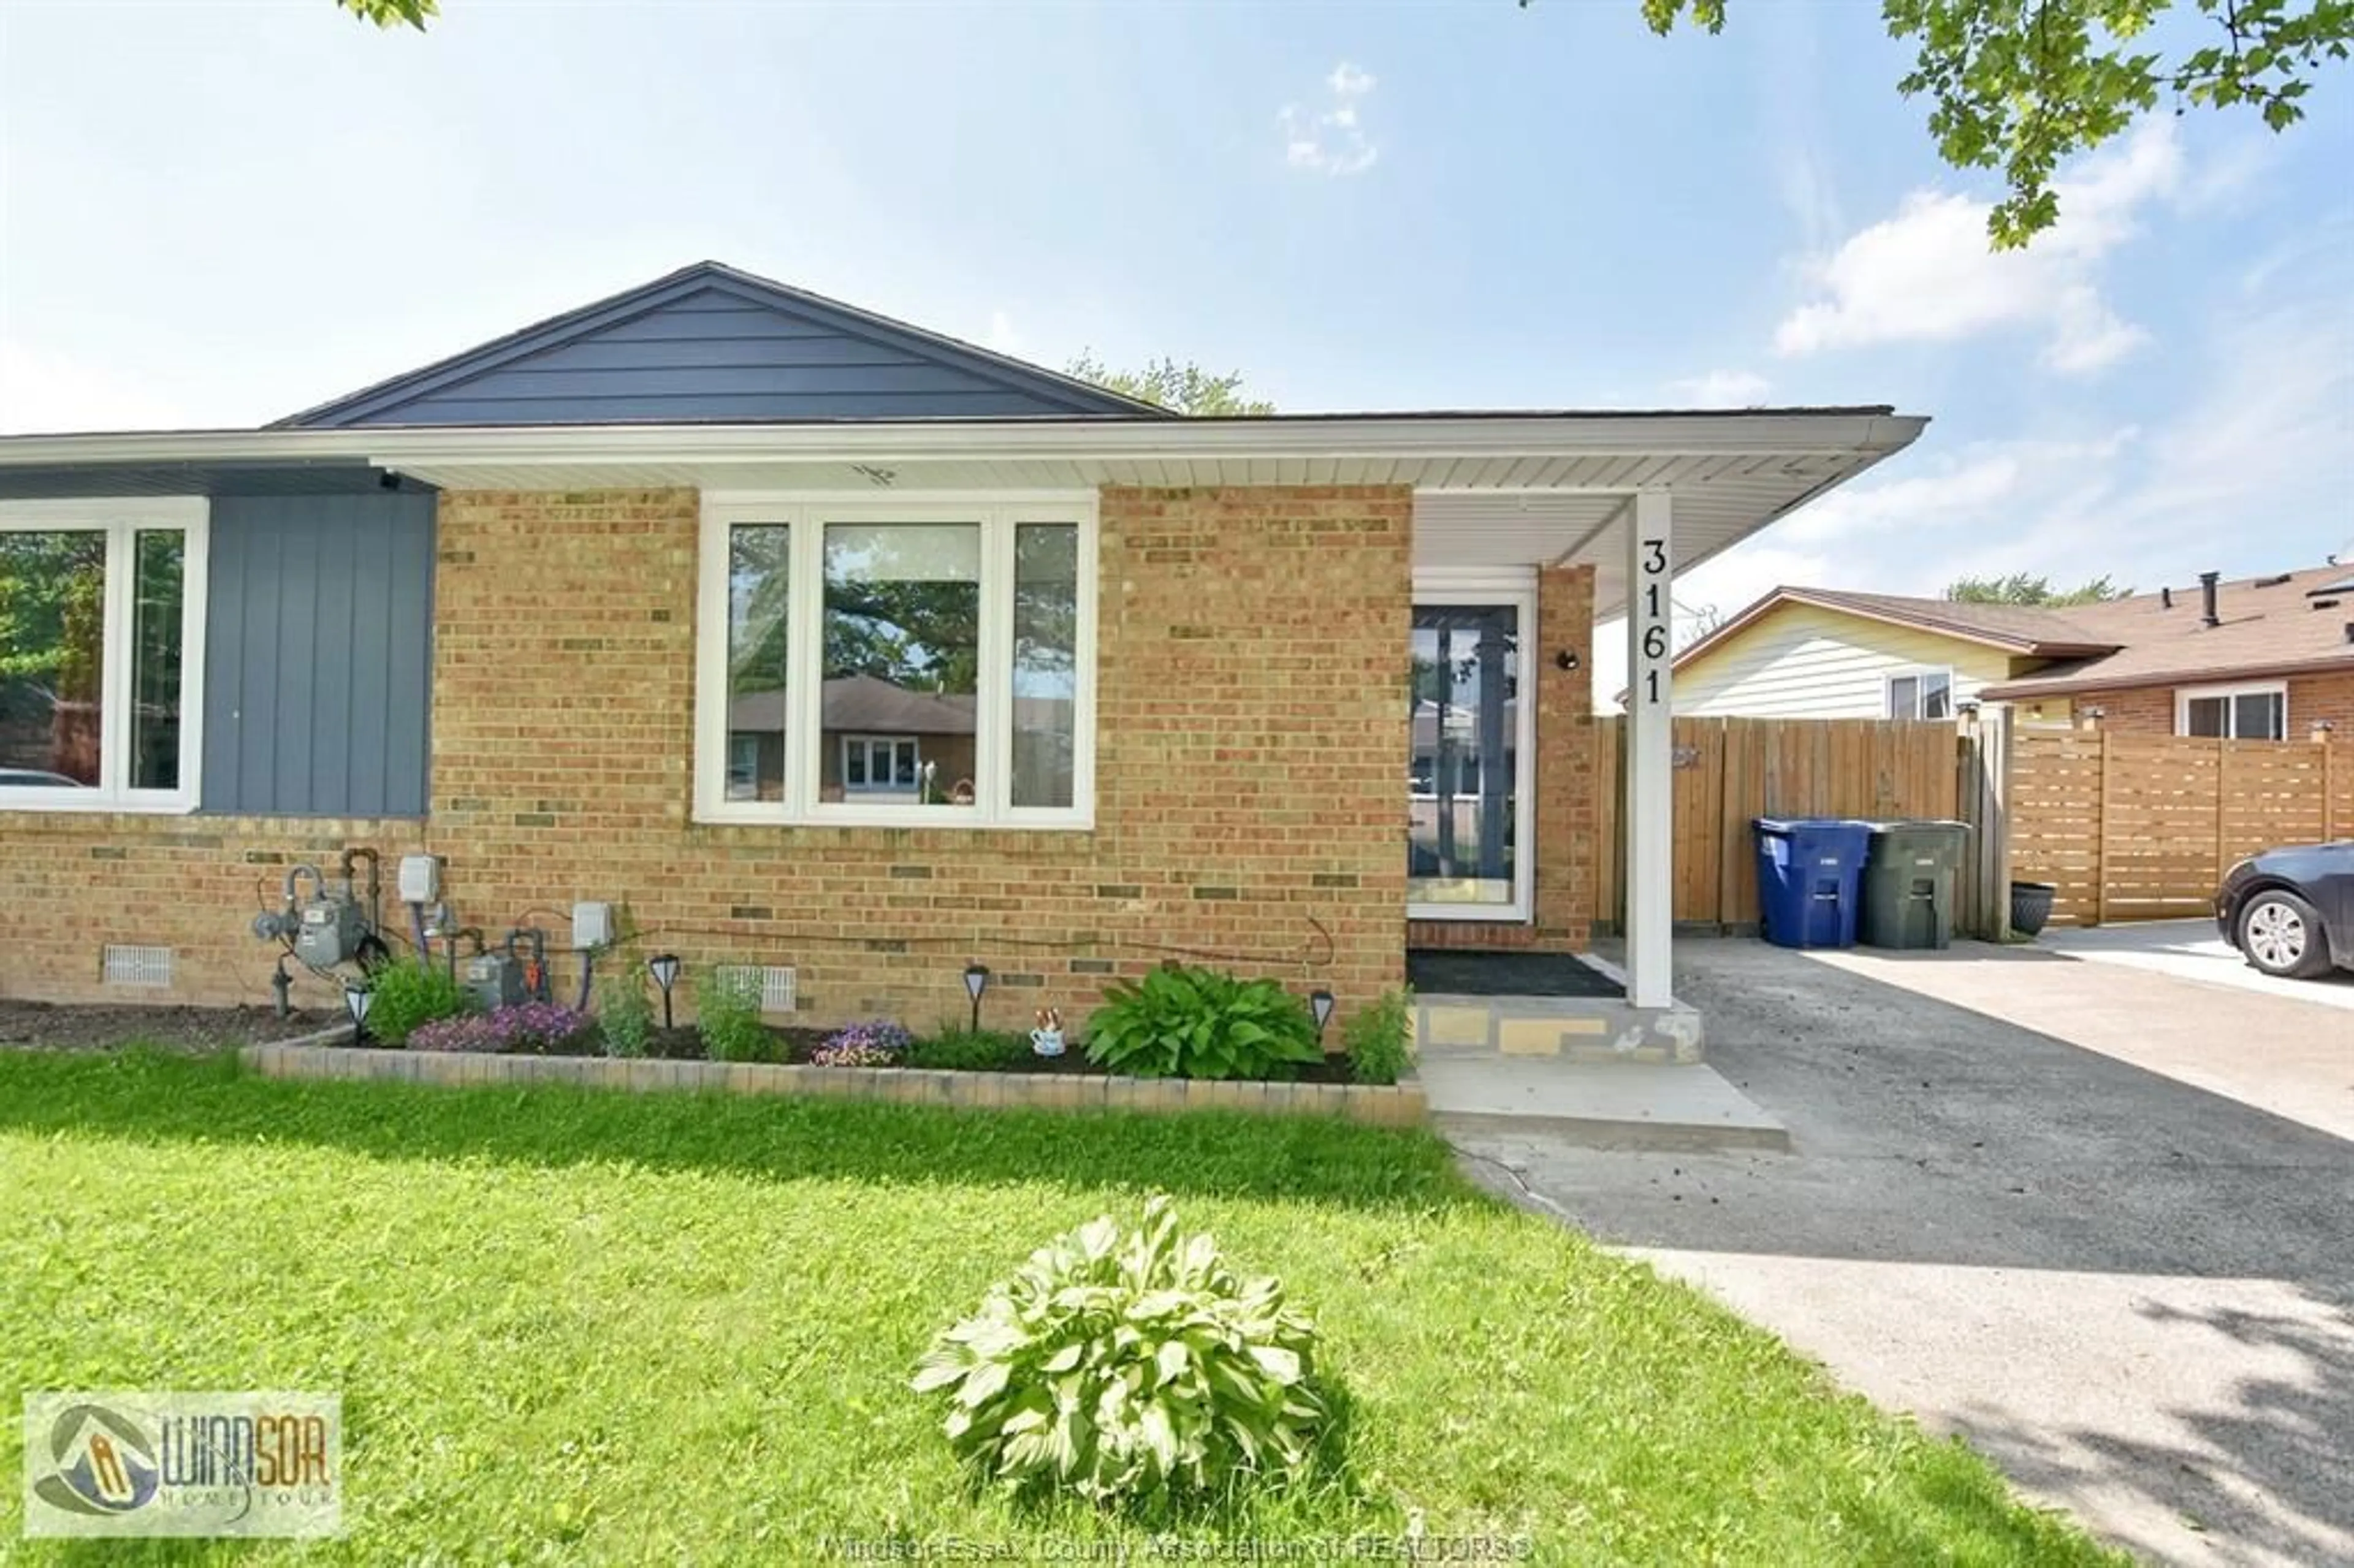 Home with brick exterior material for 3161 ELMWOOD, Windsor Ontario N8R 1X5